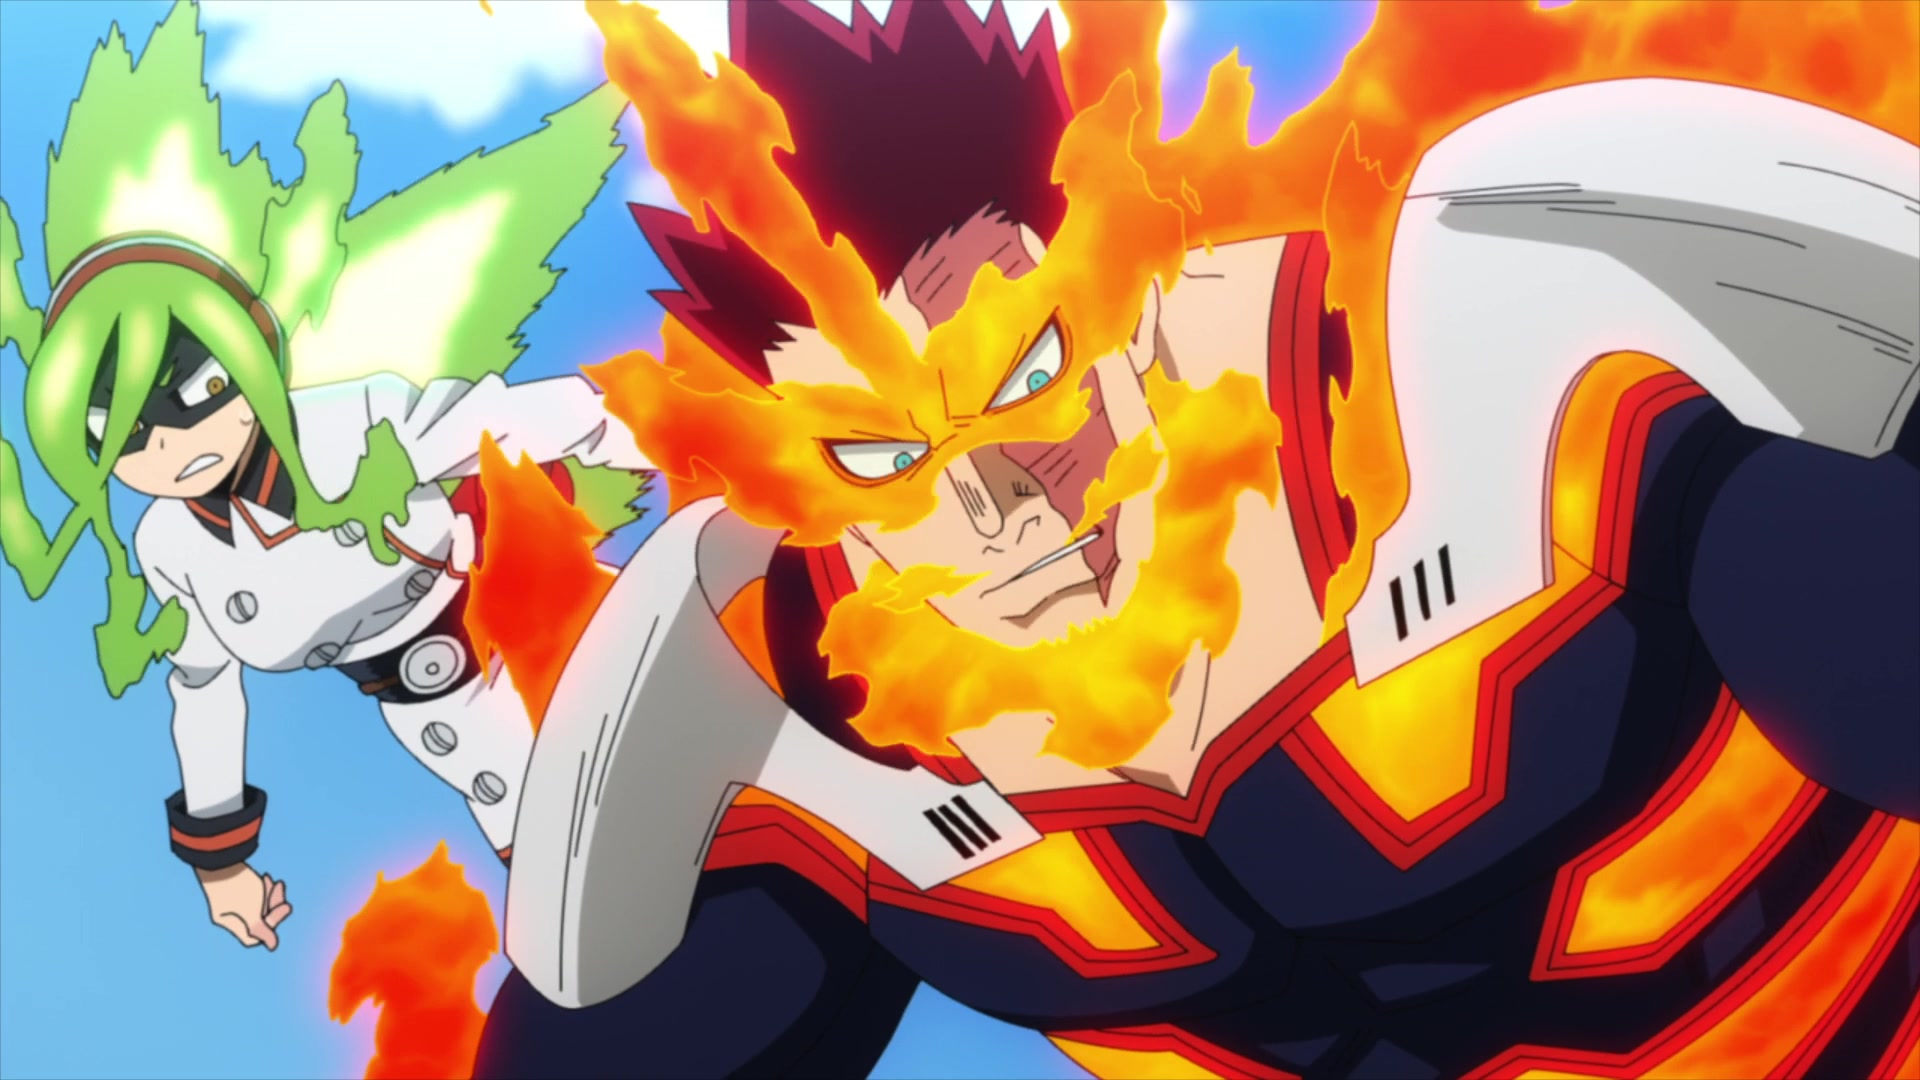 Endeavor and Burnin take in the current status of the Otheon Team in My Hero Academia: World Heroes' Mission (2021), Bones via Blu-ray